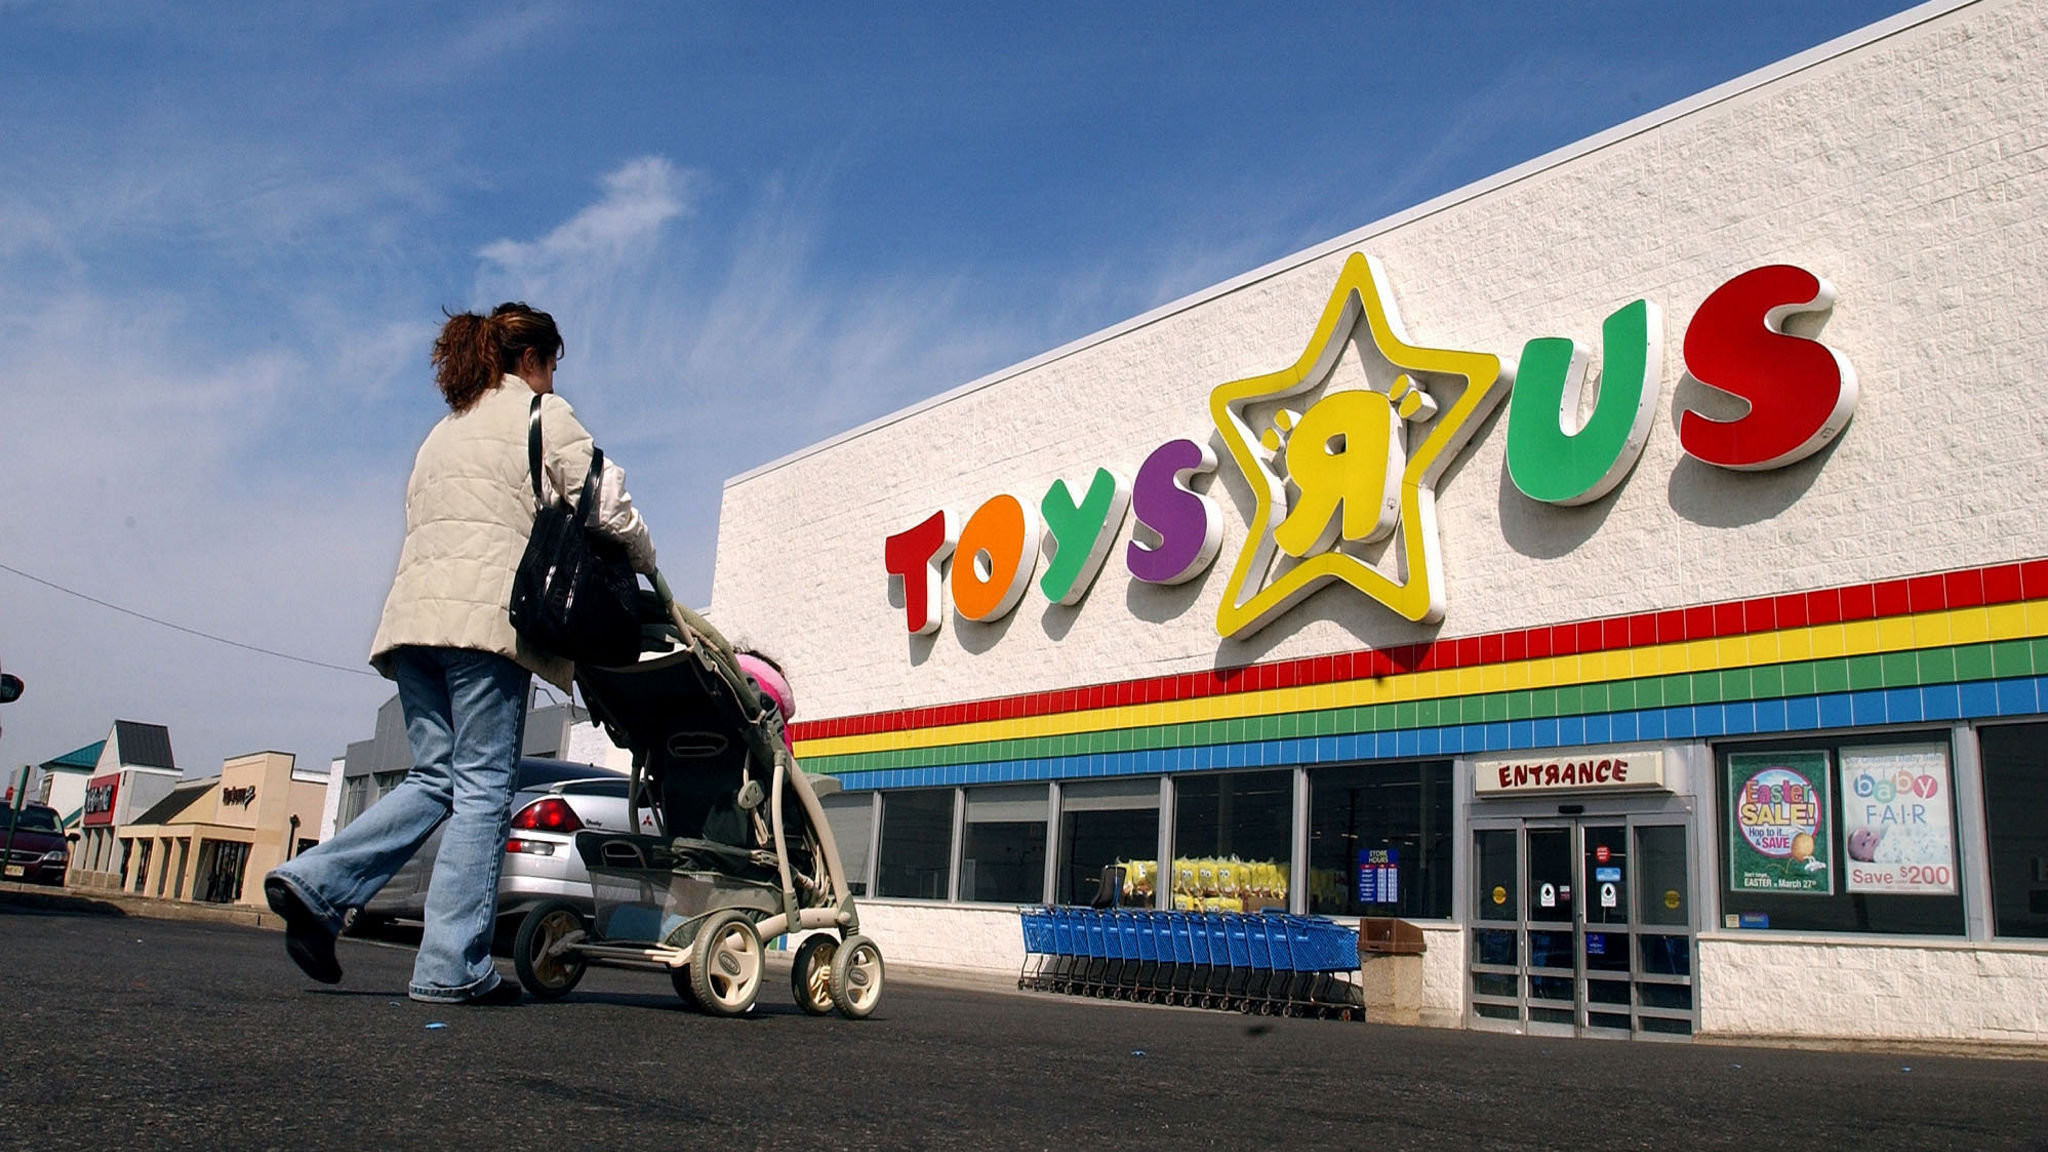 Toys R Us In Nj Resume Sample toys R Us Turns to Tech to Revive Defunct Chain Financial Times